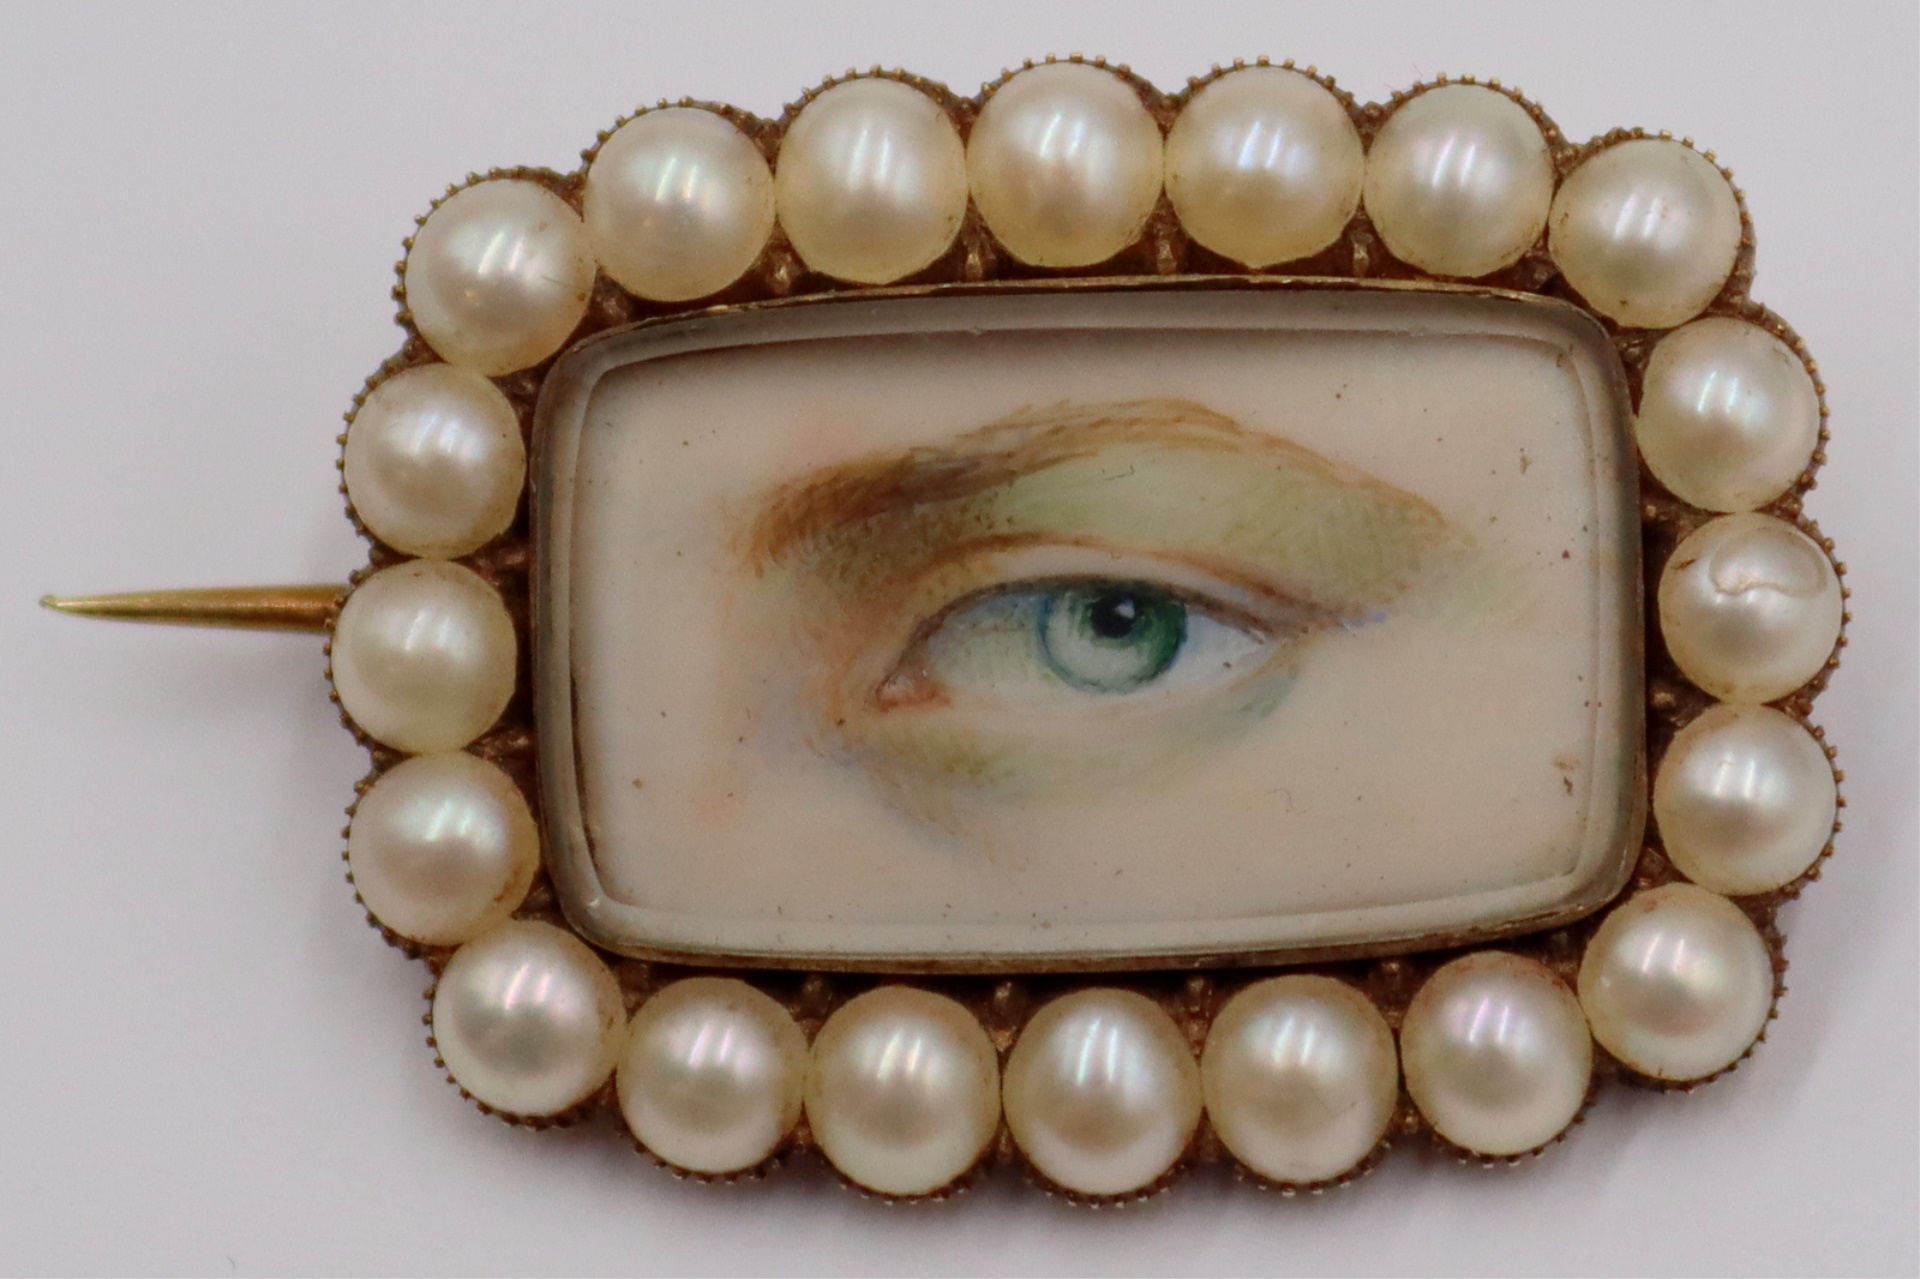 JEWELRY. EARLY 19TH C LOVER'S EYE